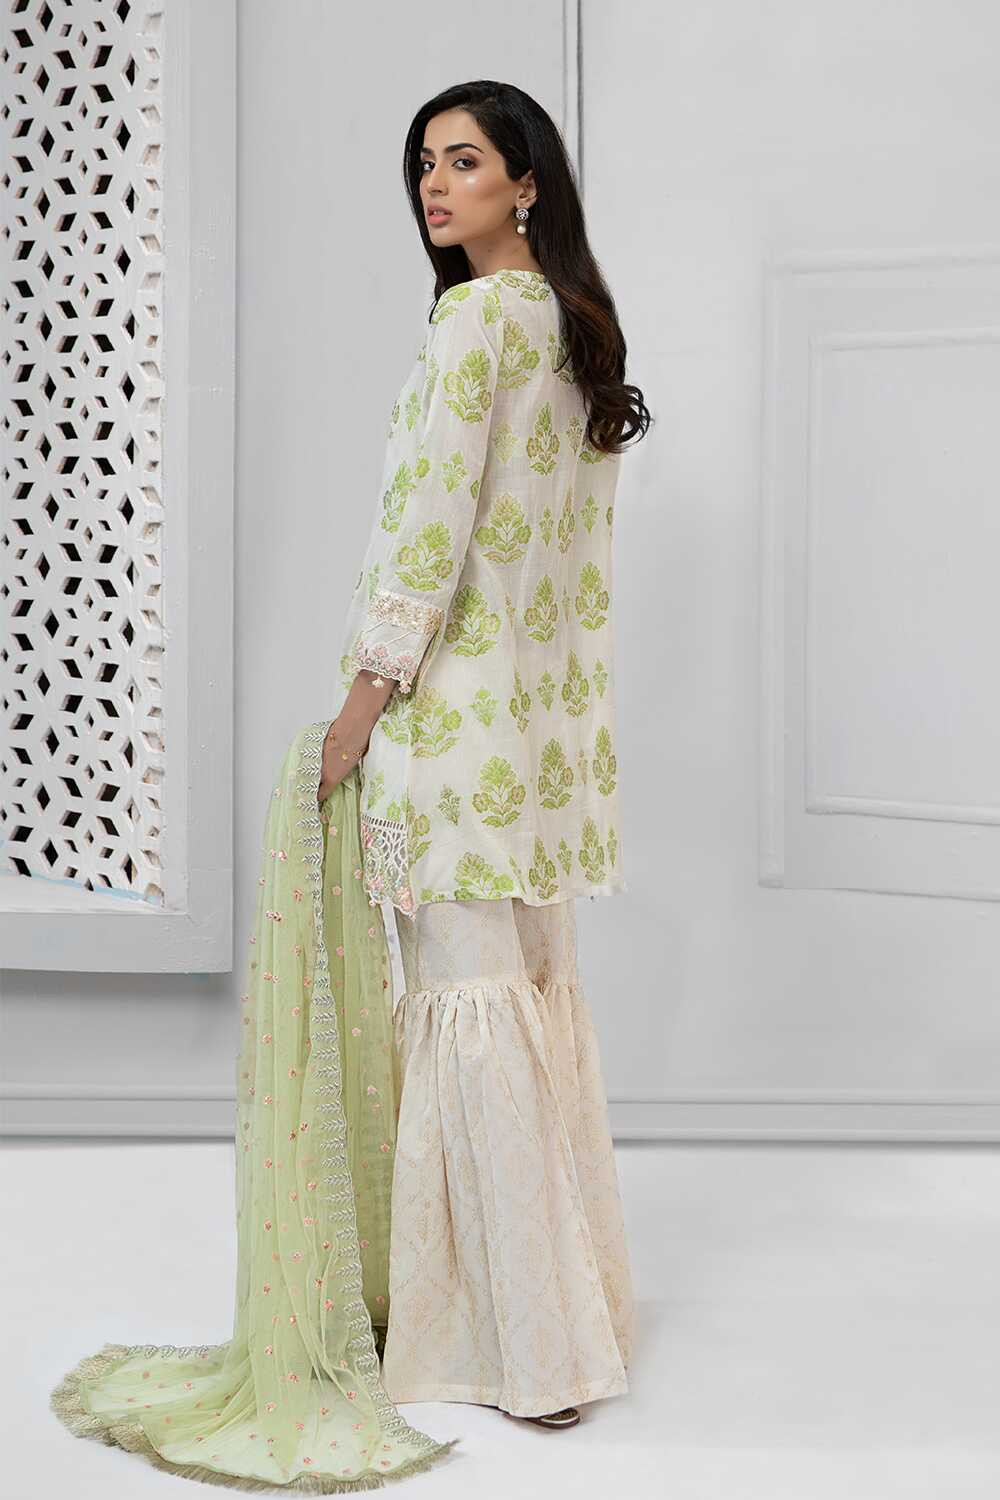 /2019/07/mariab-eid-collection-suit-light-green-dw-2225-image2.jpeg